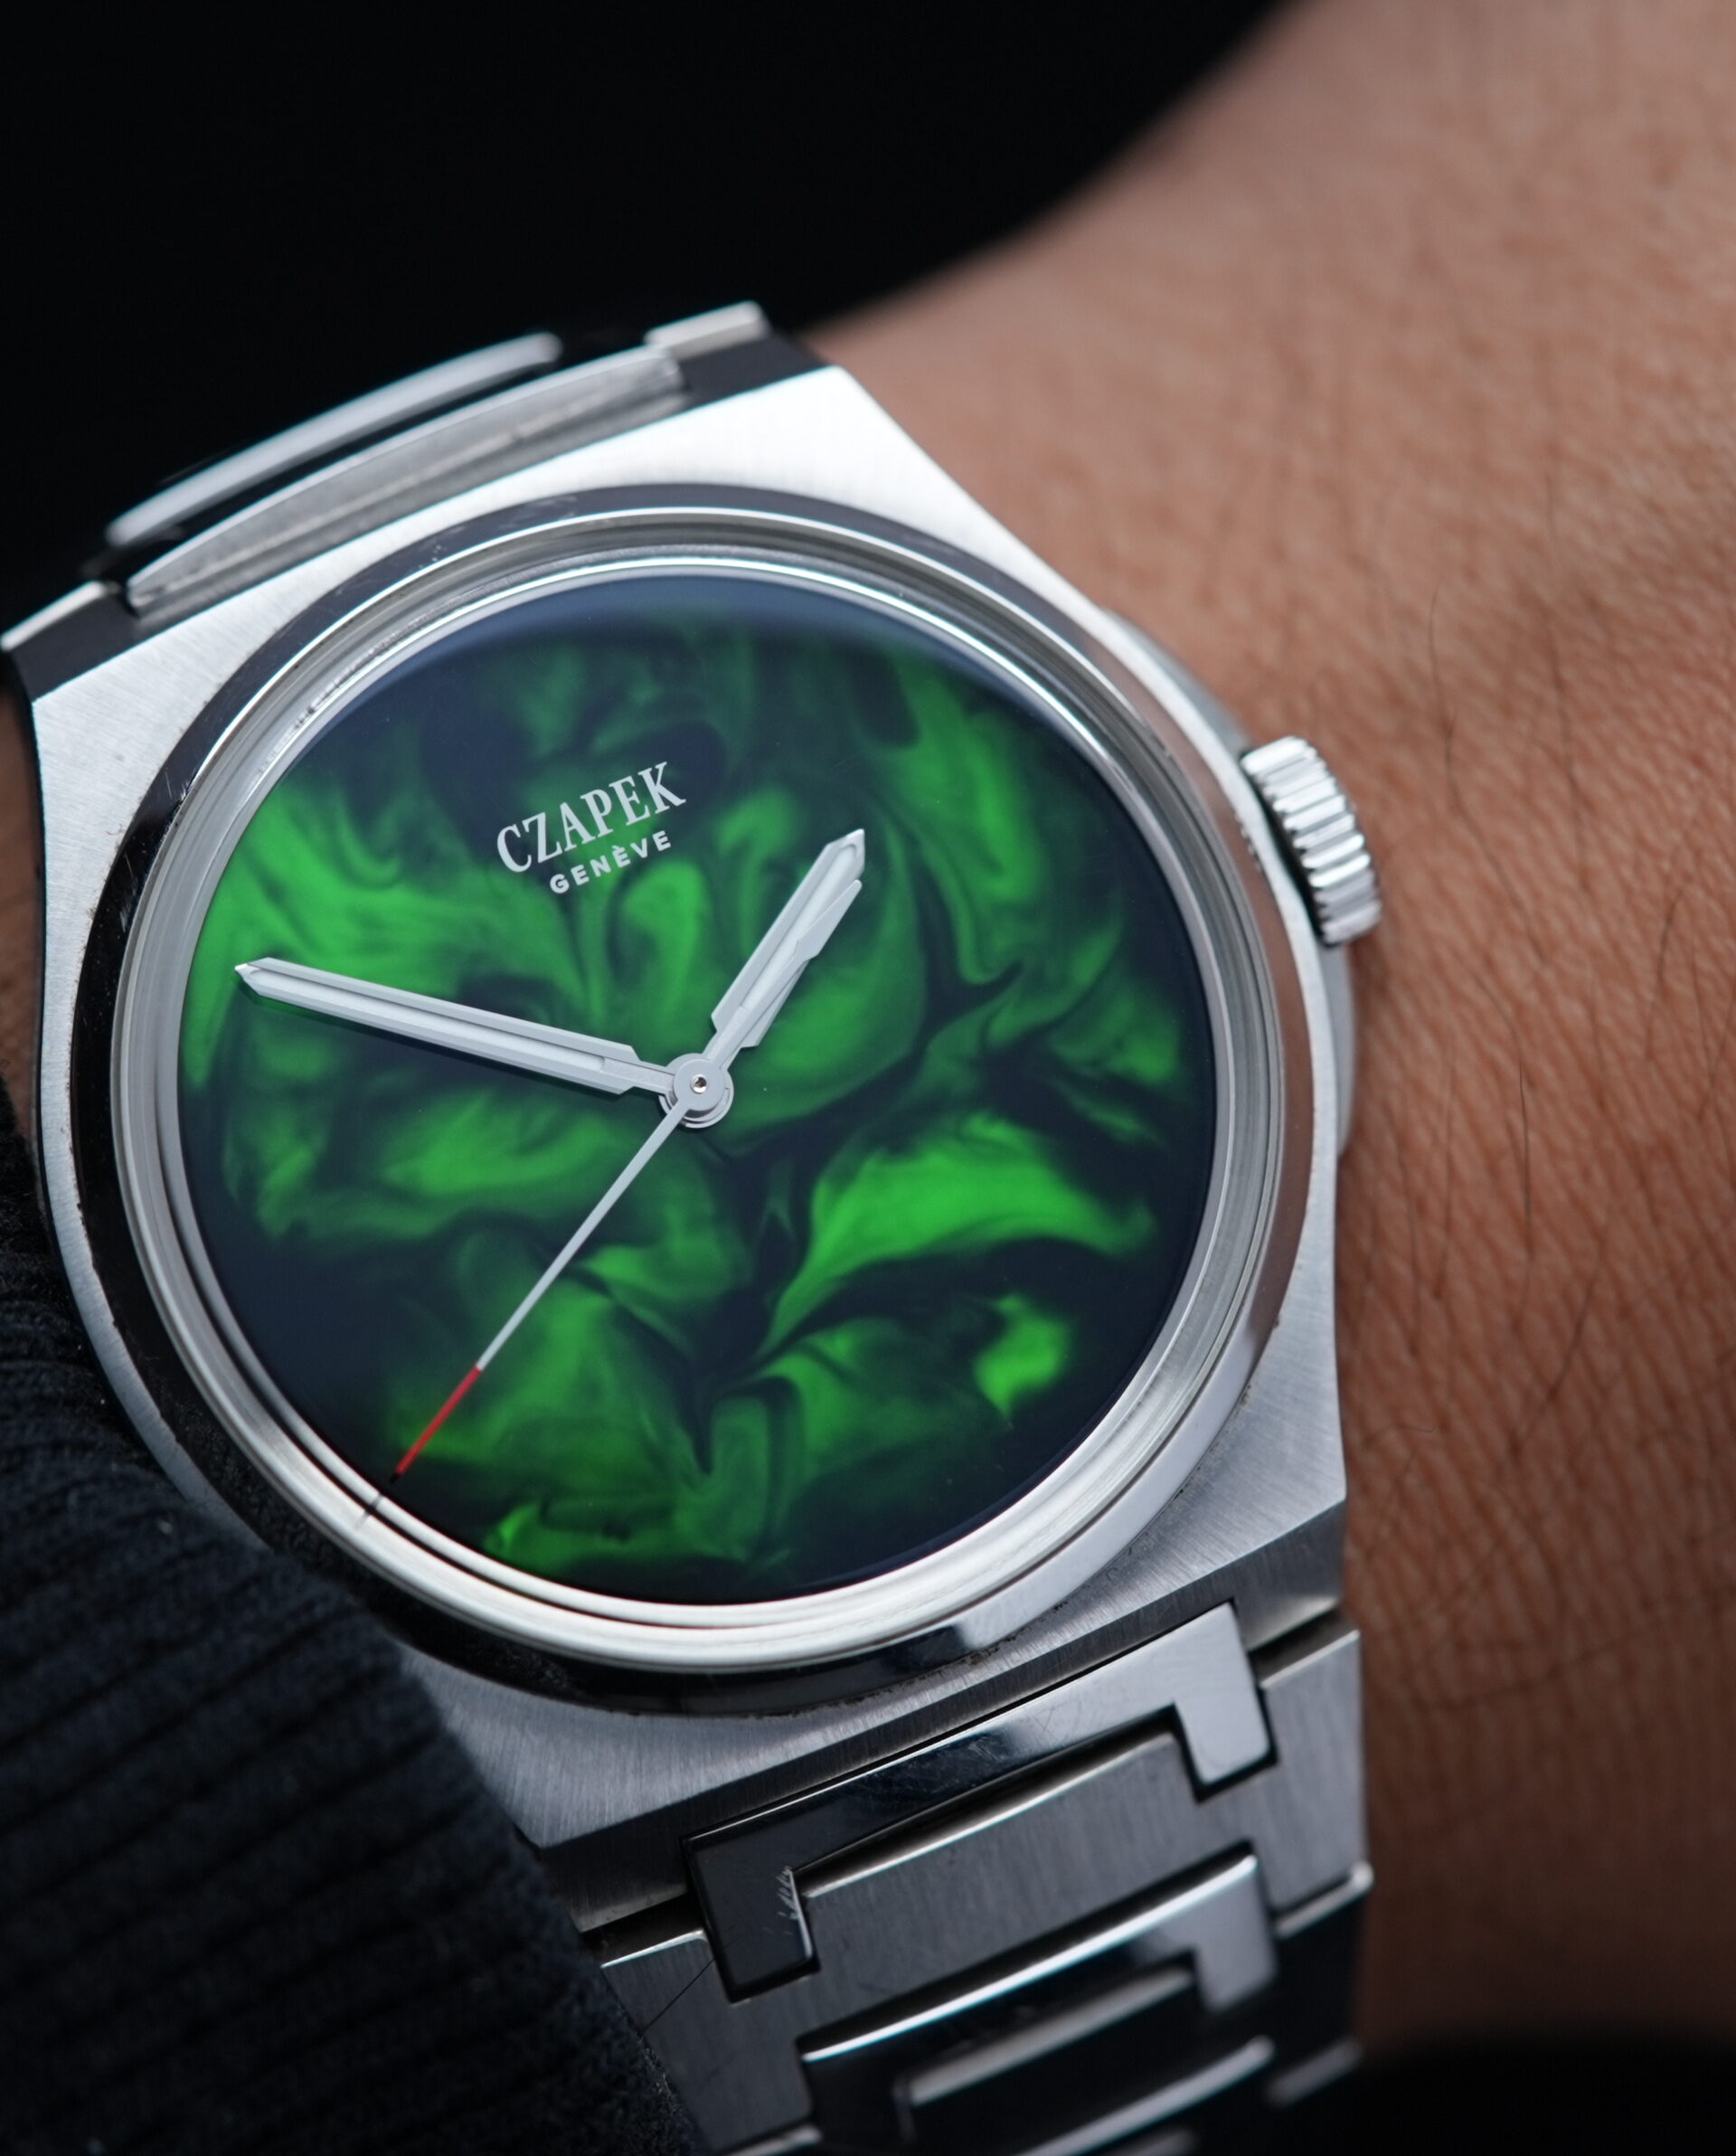 Czapek ANTARCTIQUE SPECIAL EDITION Emerald Iceberg Limited Edition watch featured ono the wrist.